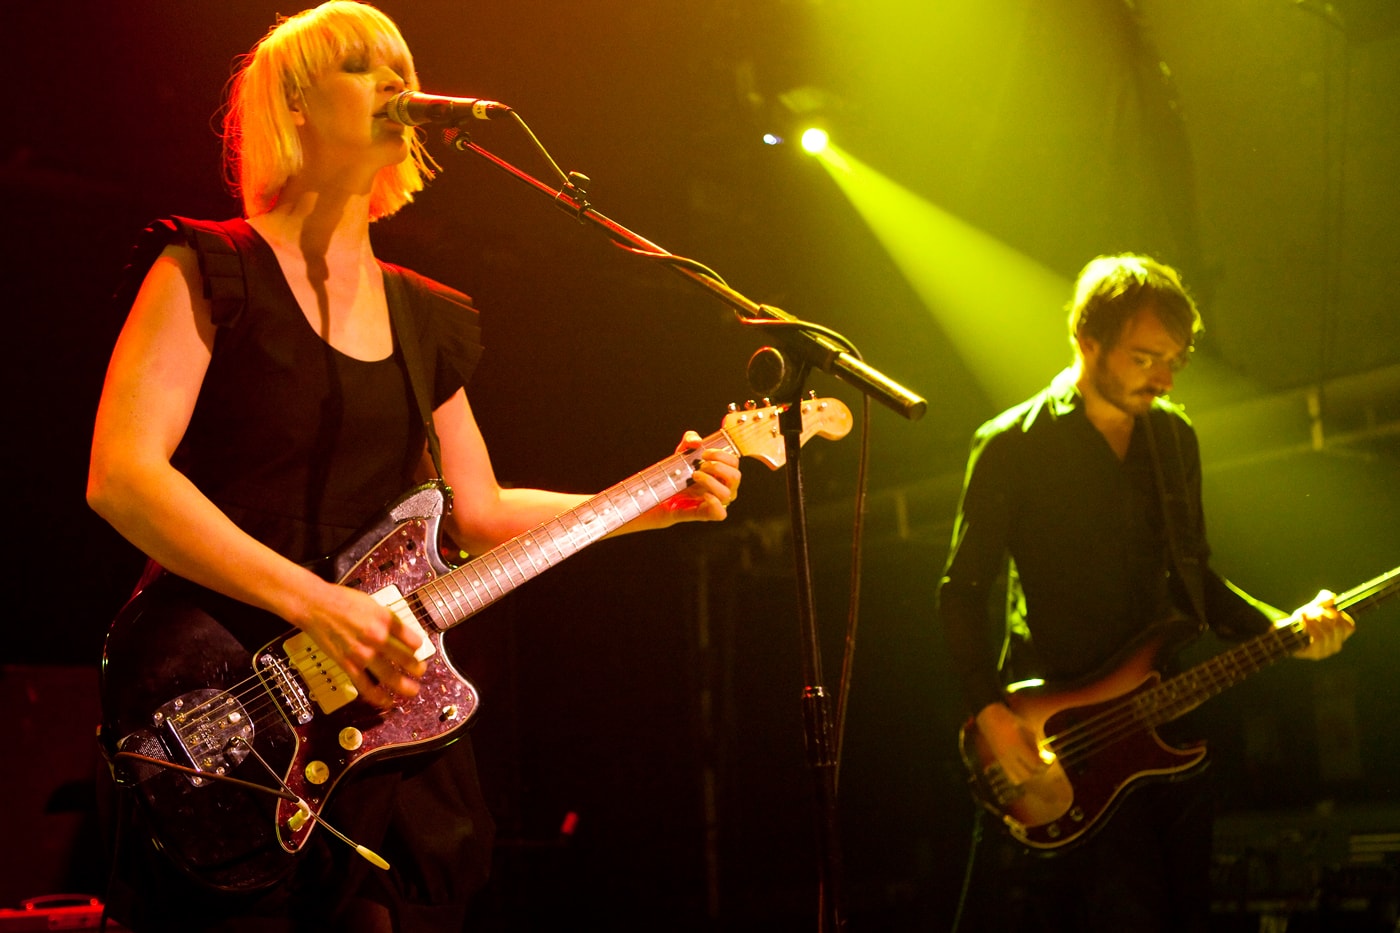 The Raveonettes - I Wanna Be Adored (The Stone Roses Cover) for Dr. Martens 50th Anniversary